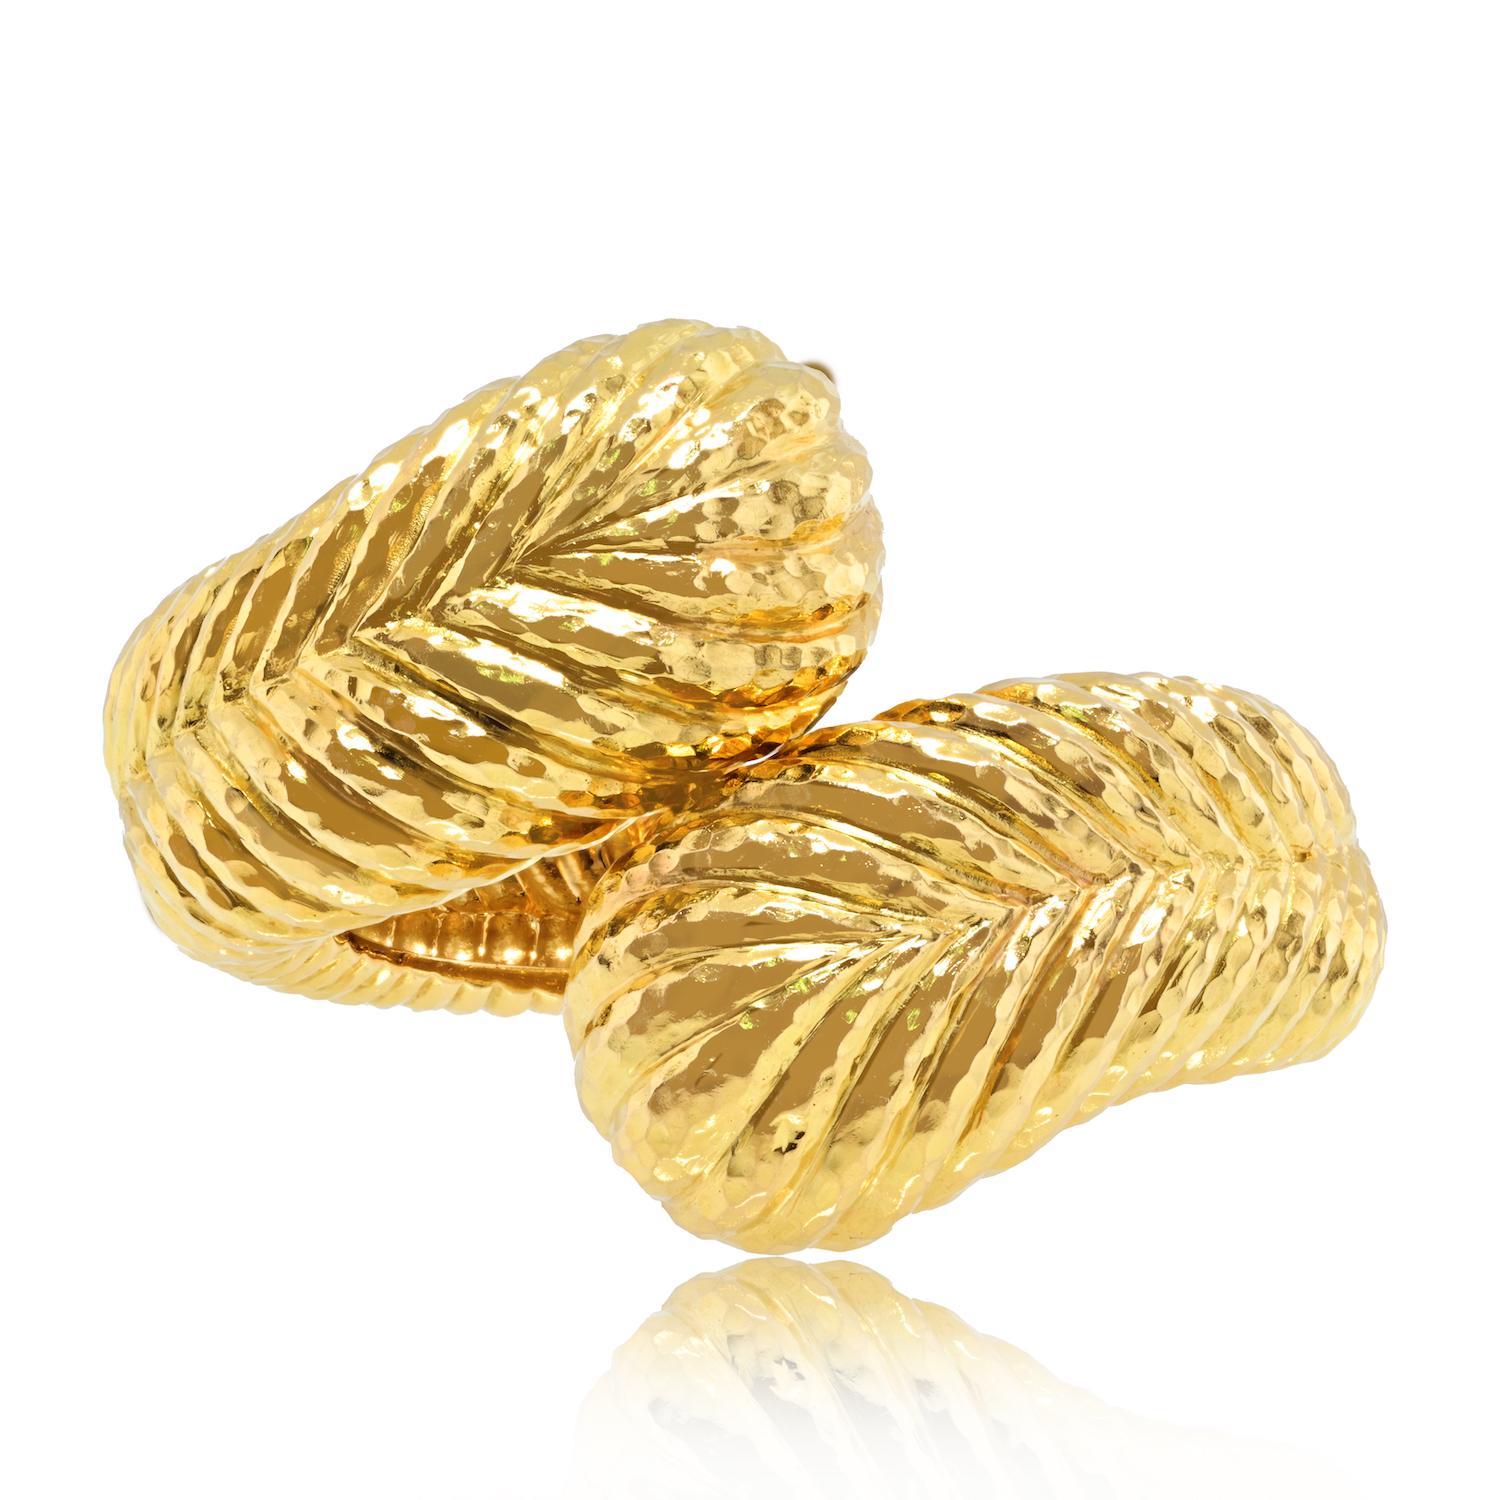 Immerse yourself in the distinctive style of David Webb with this Late-20th Century 18K Gold Bracelet. Known for his bold and innovative designs, this hinged bracelet showcases Webb's mastery in creating jewelry that is both striking and